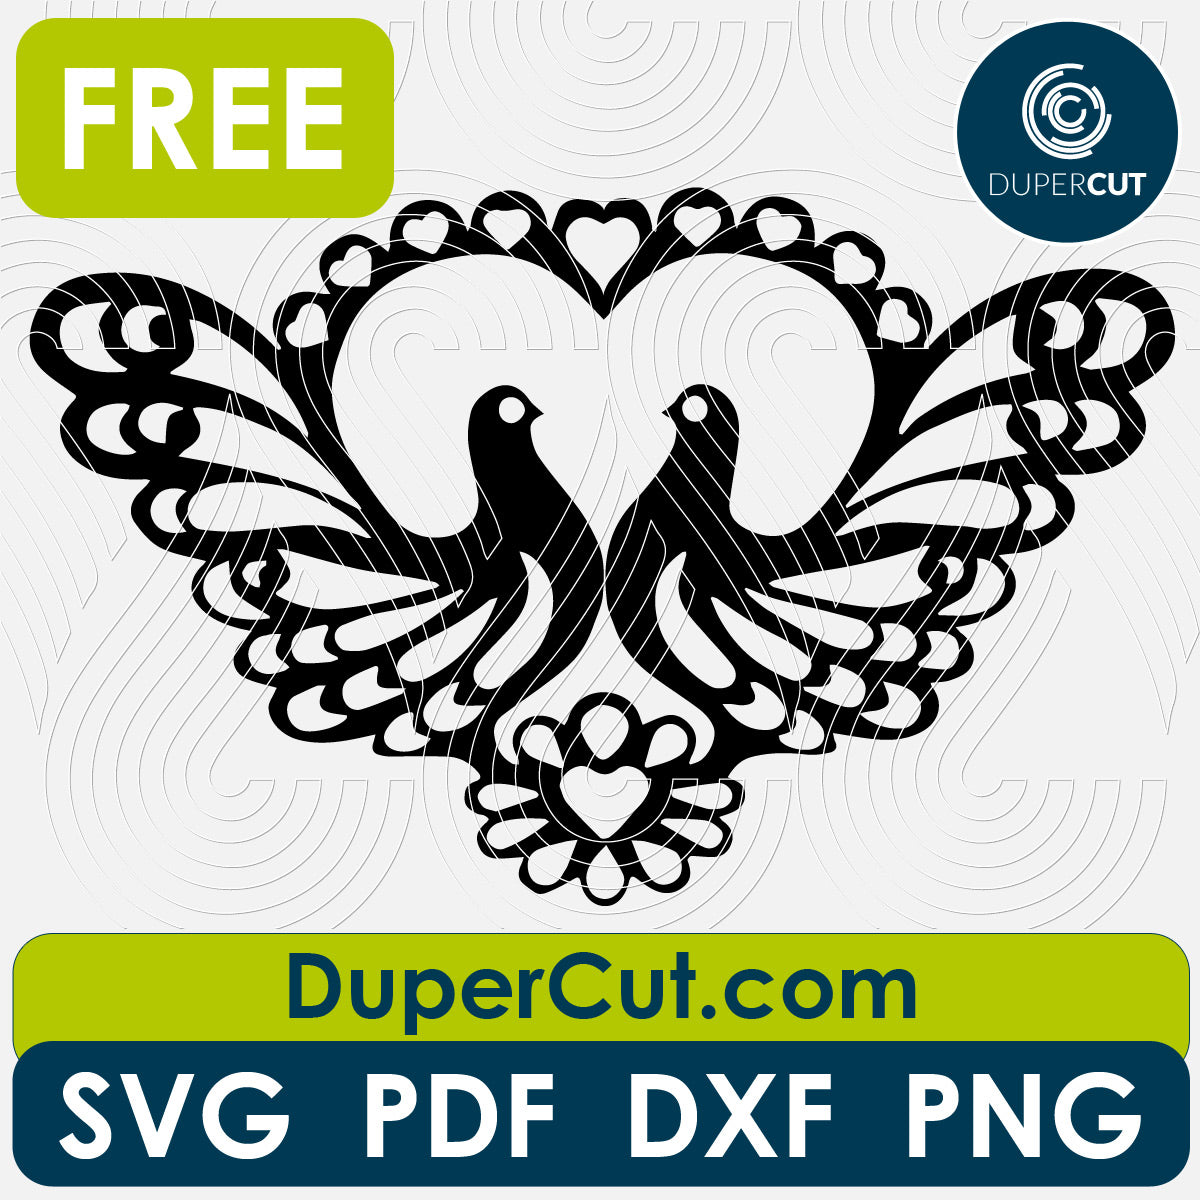 Doves couple wedding cake topper, FREE cutting template SVG PNG DXF files for Glowforge, Cricut, Silhouette, CNC laser router by DuperCut.com